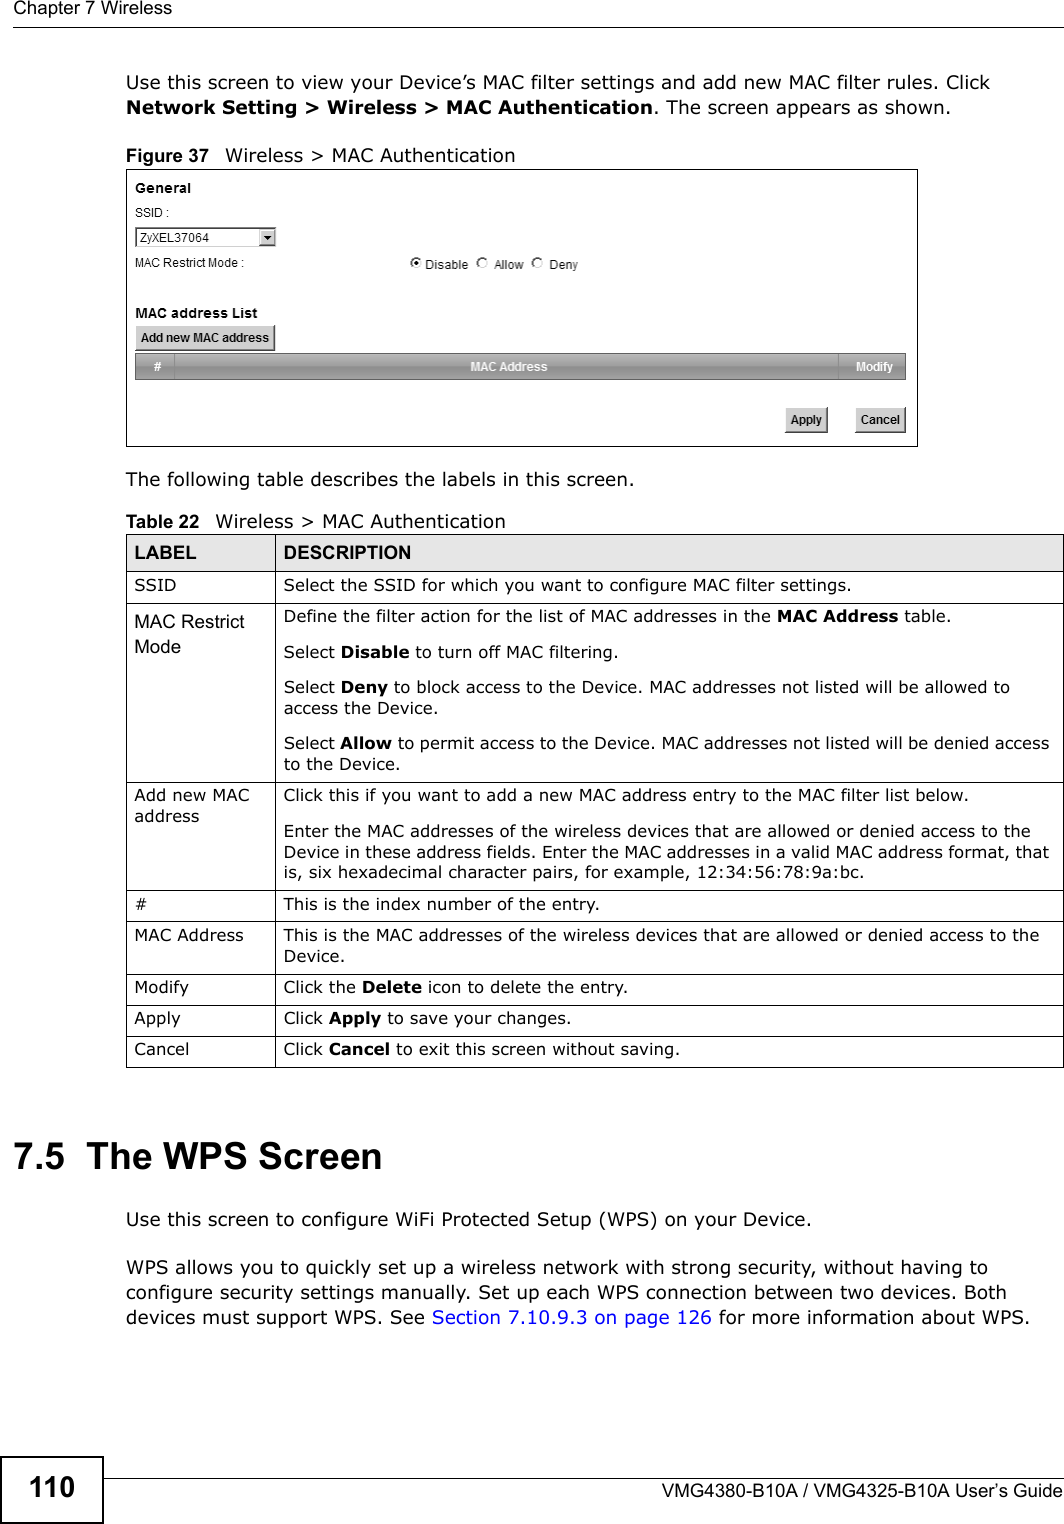 Chapter 7 WirelessVMG4380-B10A / VMG4325-B10A User’s Guide110Use this screen to view your Device’s MAC filter settings and add new MAC filter rules. Click Network Setting &gt; Wireless &gt; MAC Authentication. The screen appears as shown.Figure 37   Wireless &gt; MAC AuthenticationThe following table describes the labels in this screen.7.5  The WPS ScreenUse this screen to configure WiFi Protected Setup (WPS) on your Device.WPS allows you to quickly set up a wireless network with strong security, without having to configure security settings manually. Set up each WPS connection between two devices. Both devices must support WPS. See Section 7.10.9.3 on page 126 for more information about WPS.Table 22   Wireless &gt; MAC AuthenticationLABEL DESCRIPTIONSSID Select the SSID for which you want to configure MAC filter settings.MAC Restrict Mode Define the filter action for the list of MAC addresses in the MAC Address table.Select Disable to turn off MAC filtering.Select Deny to block access to the Device. MAC addresses not listed will be allowed to access the Device.Select Allow to permit access to the Device. MAC addresses not listed will be denied accessto the Device. Add new MAC addressClick this if you want to add a new MAC address entry to the MAC filter list below.Enter the MAC addresses of the wireless devices that are allowed or denied access to the Device in these address fields. Enter the MAC addresses in a valid MAC address format, that is, six hexadecimal character pairs, for example, 12:34:56:78:9a:bc.# This is the index number of the entry.MAC Address This is the MAC addresses of the wireless devices that are allowed or denied access to the Device.Modify Click the Delete icon to delete the entry.Apply Click Apply to save your changes.Cancel Click Cancel to exit this screen without saving.